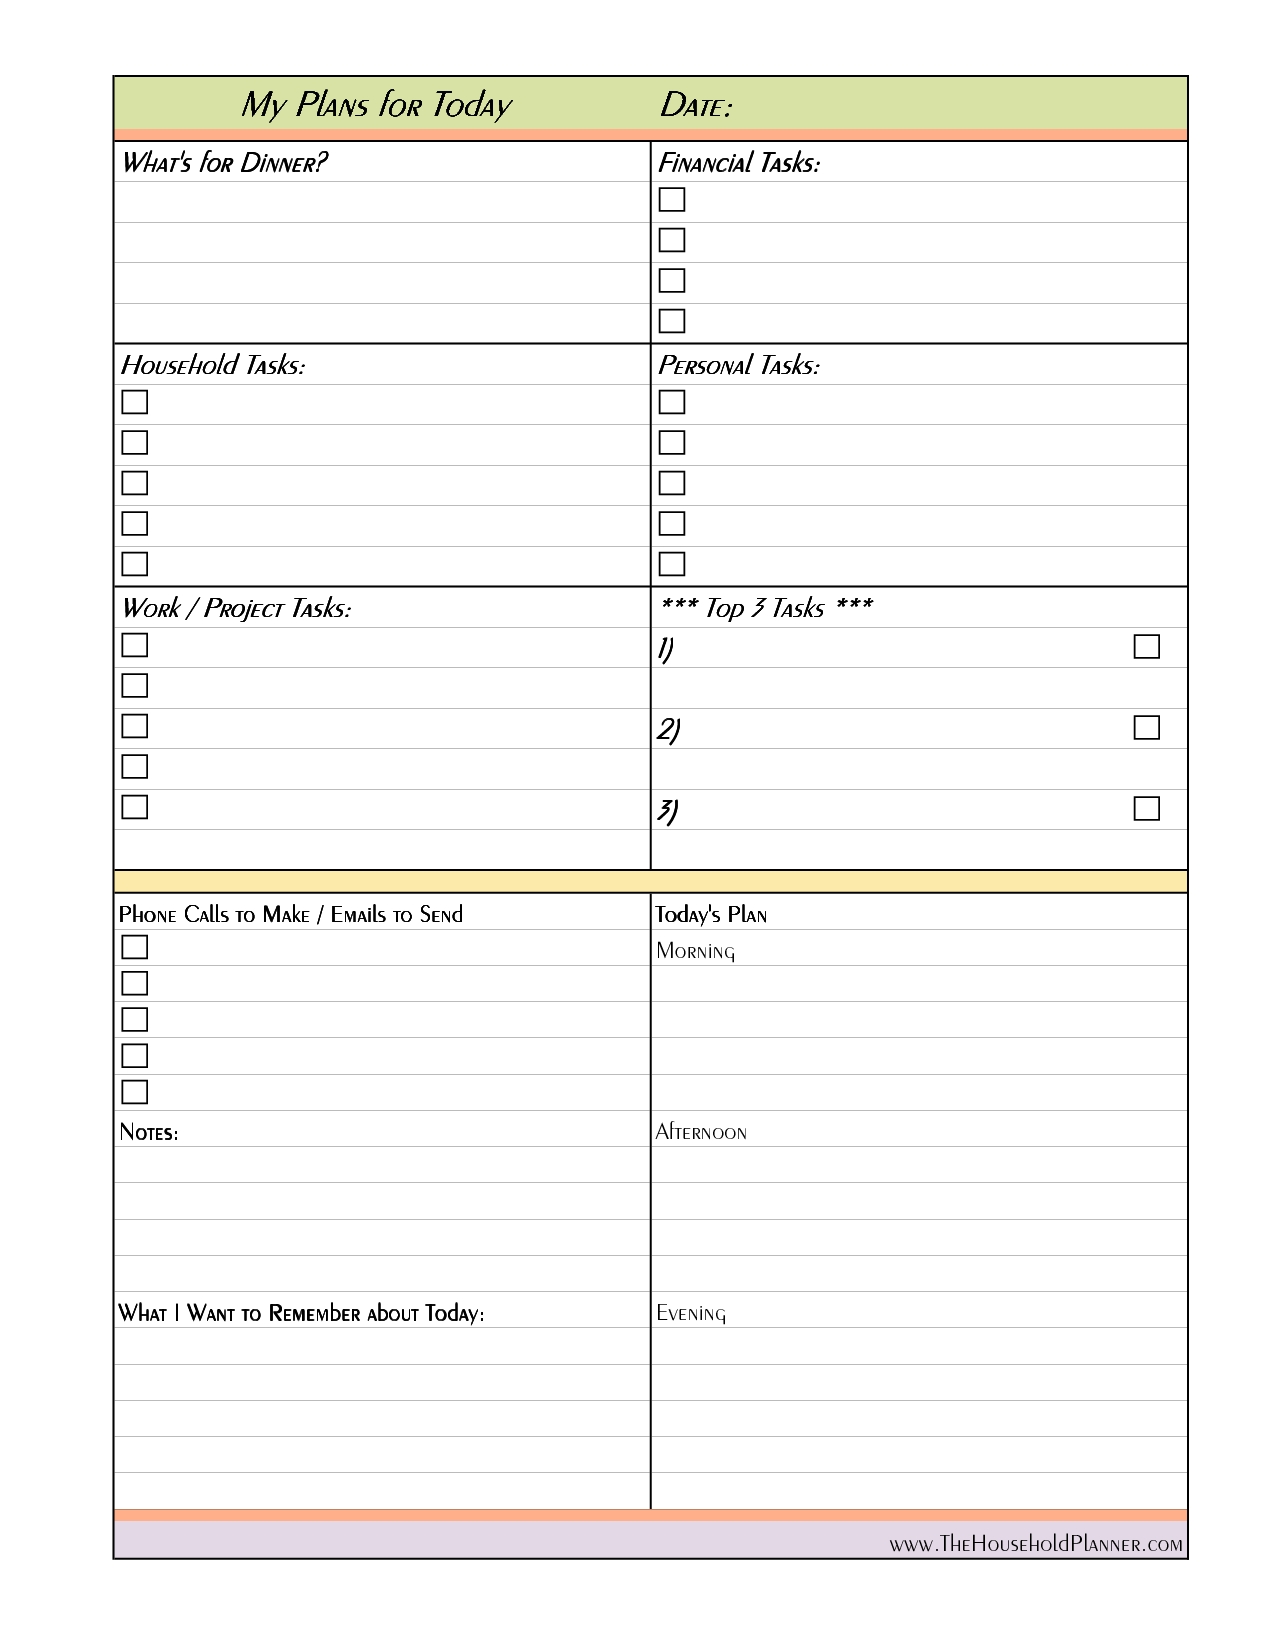 Daily Project Organizer Templates Free | Free Printable Daily intended for Calendar Day Planner Templates Free